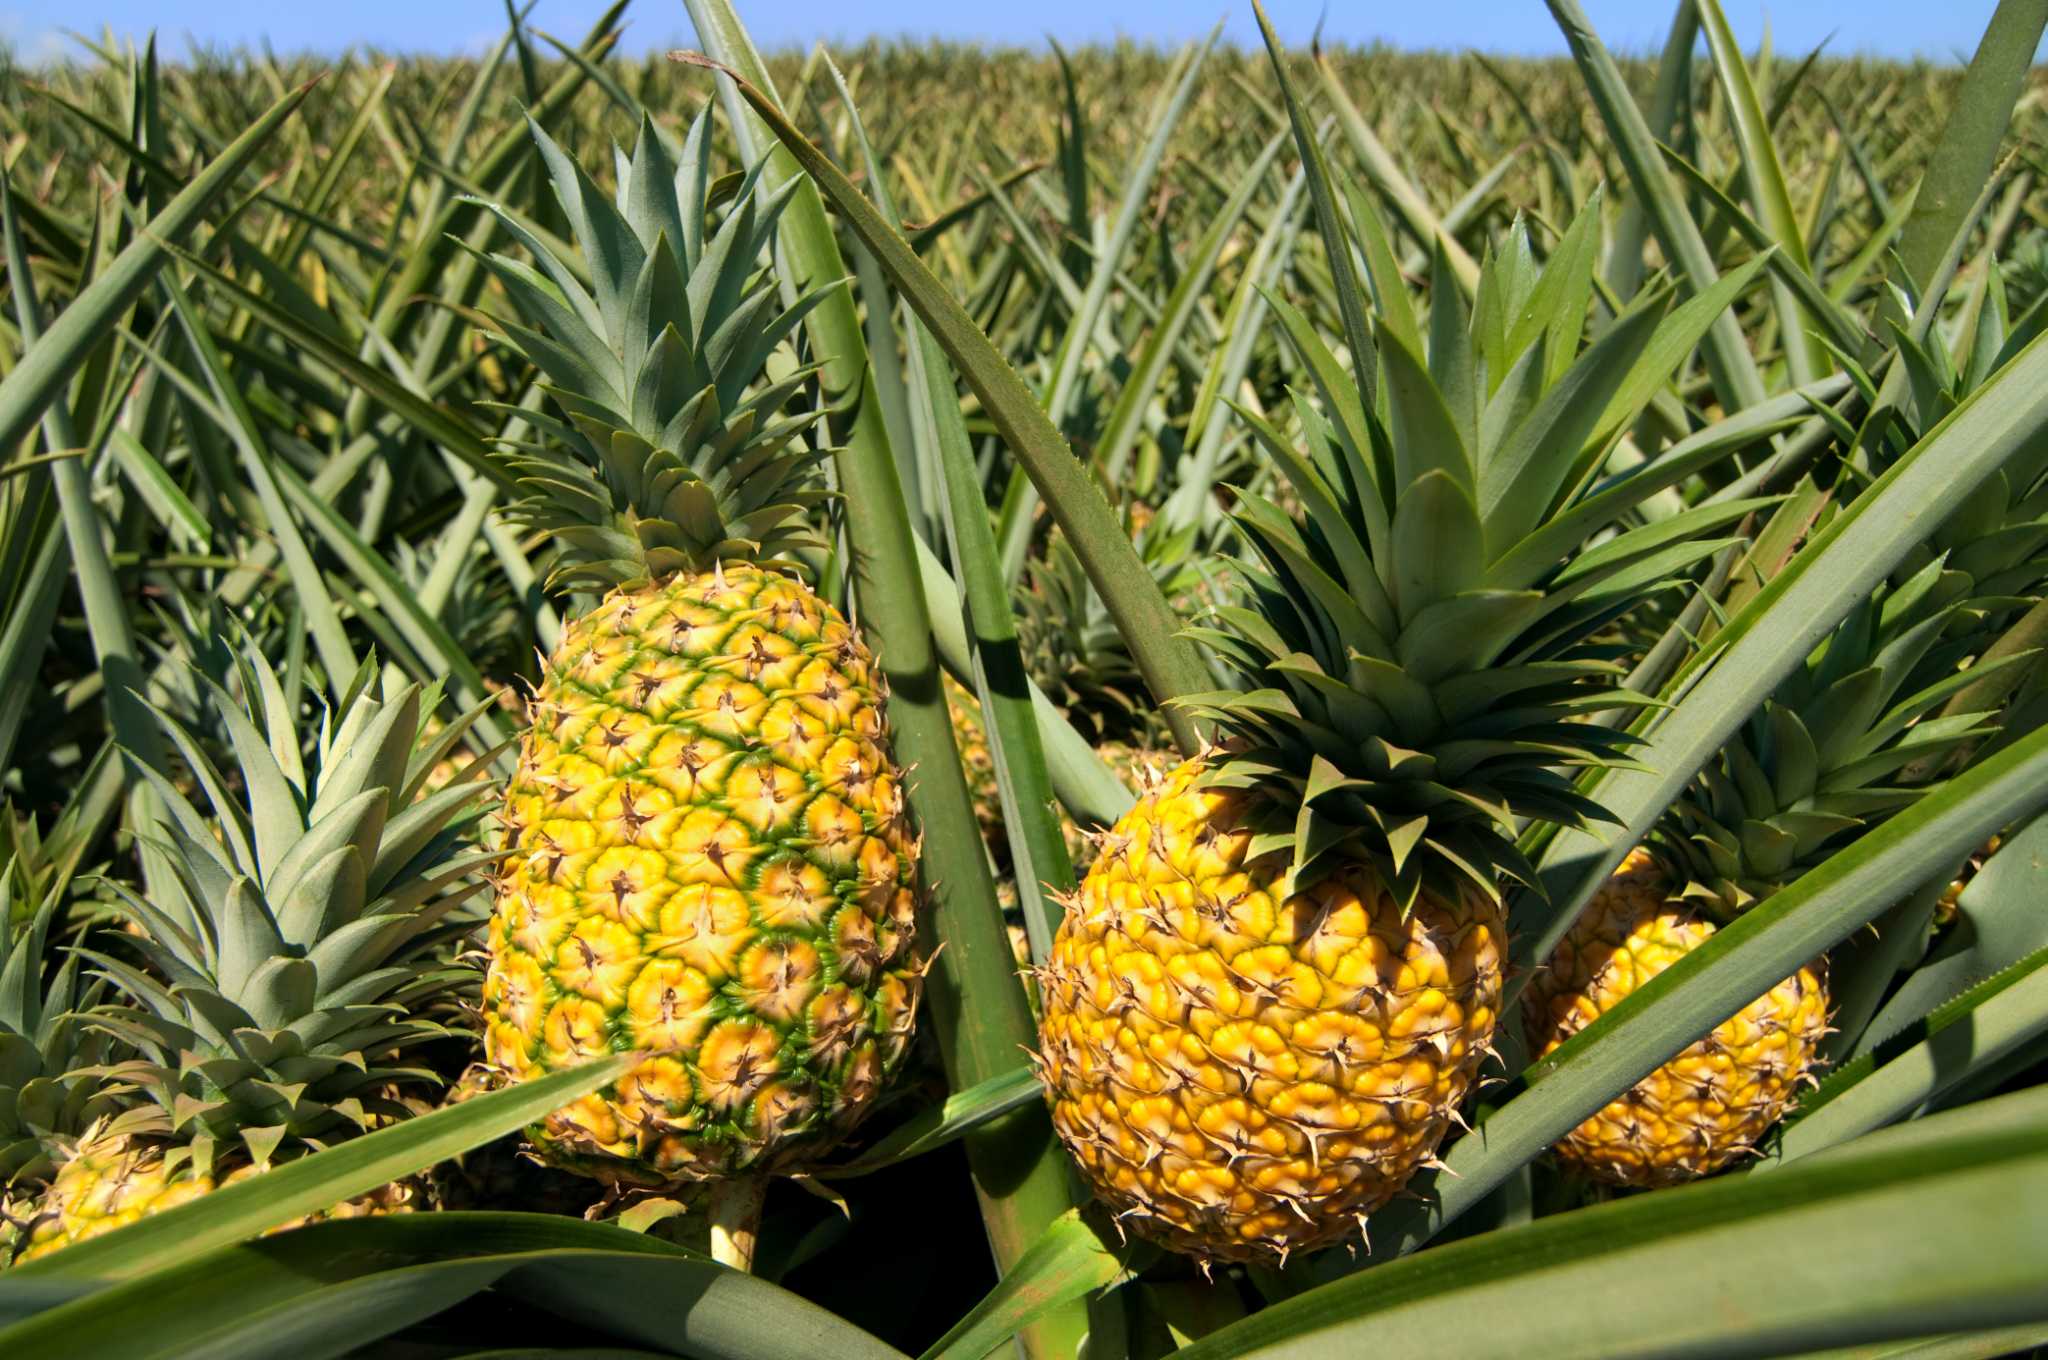 where do pineapples grow from trees or the ground